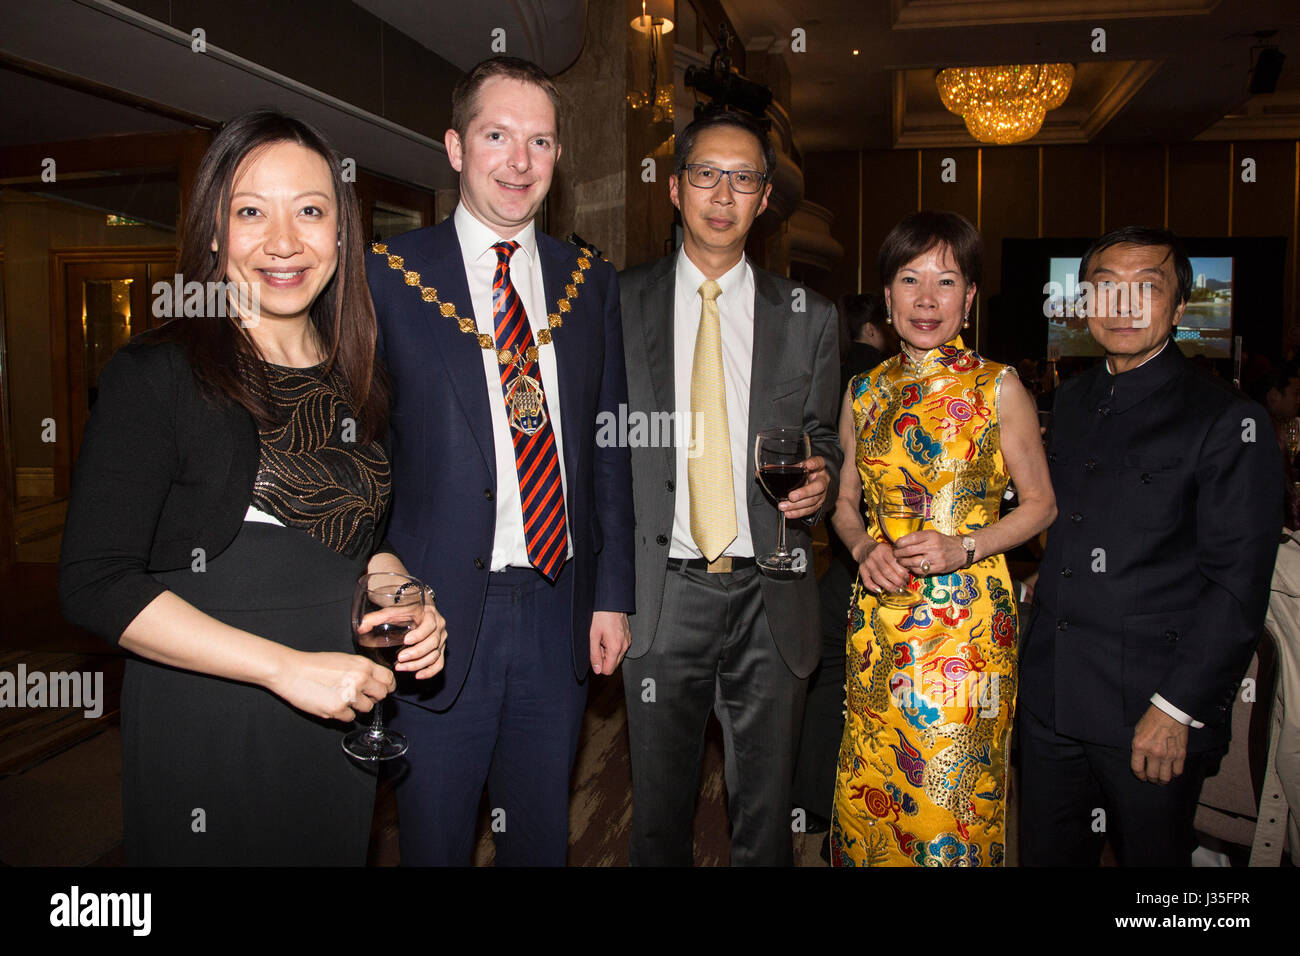 London, UK. 2nd May, 2017. Steve Summers, the Lord Mayor of Westminster (centre) poses with organisers and leaders of the London Chinese community. The Hong Kong Fashion Designers Showcase takes place at the London Hilton featuring clothes by Daniel Poole, Daydream Nation, Injury and Kenaxleung with accessories by Jaycow and ZO-EE. The event was organised by the Hong Kong Executives Club and the Chinese Community Centre. Credit: Vibrant Pictures/Alamy Live News Stock Photo